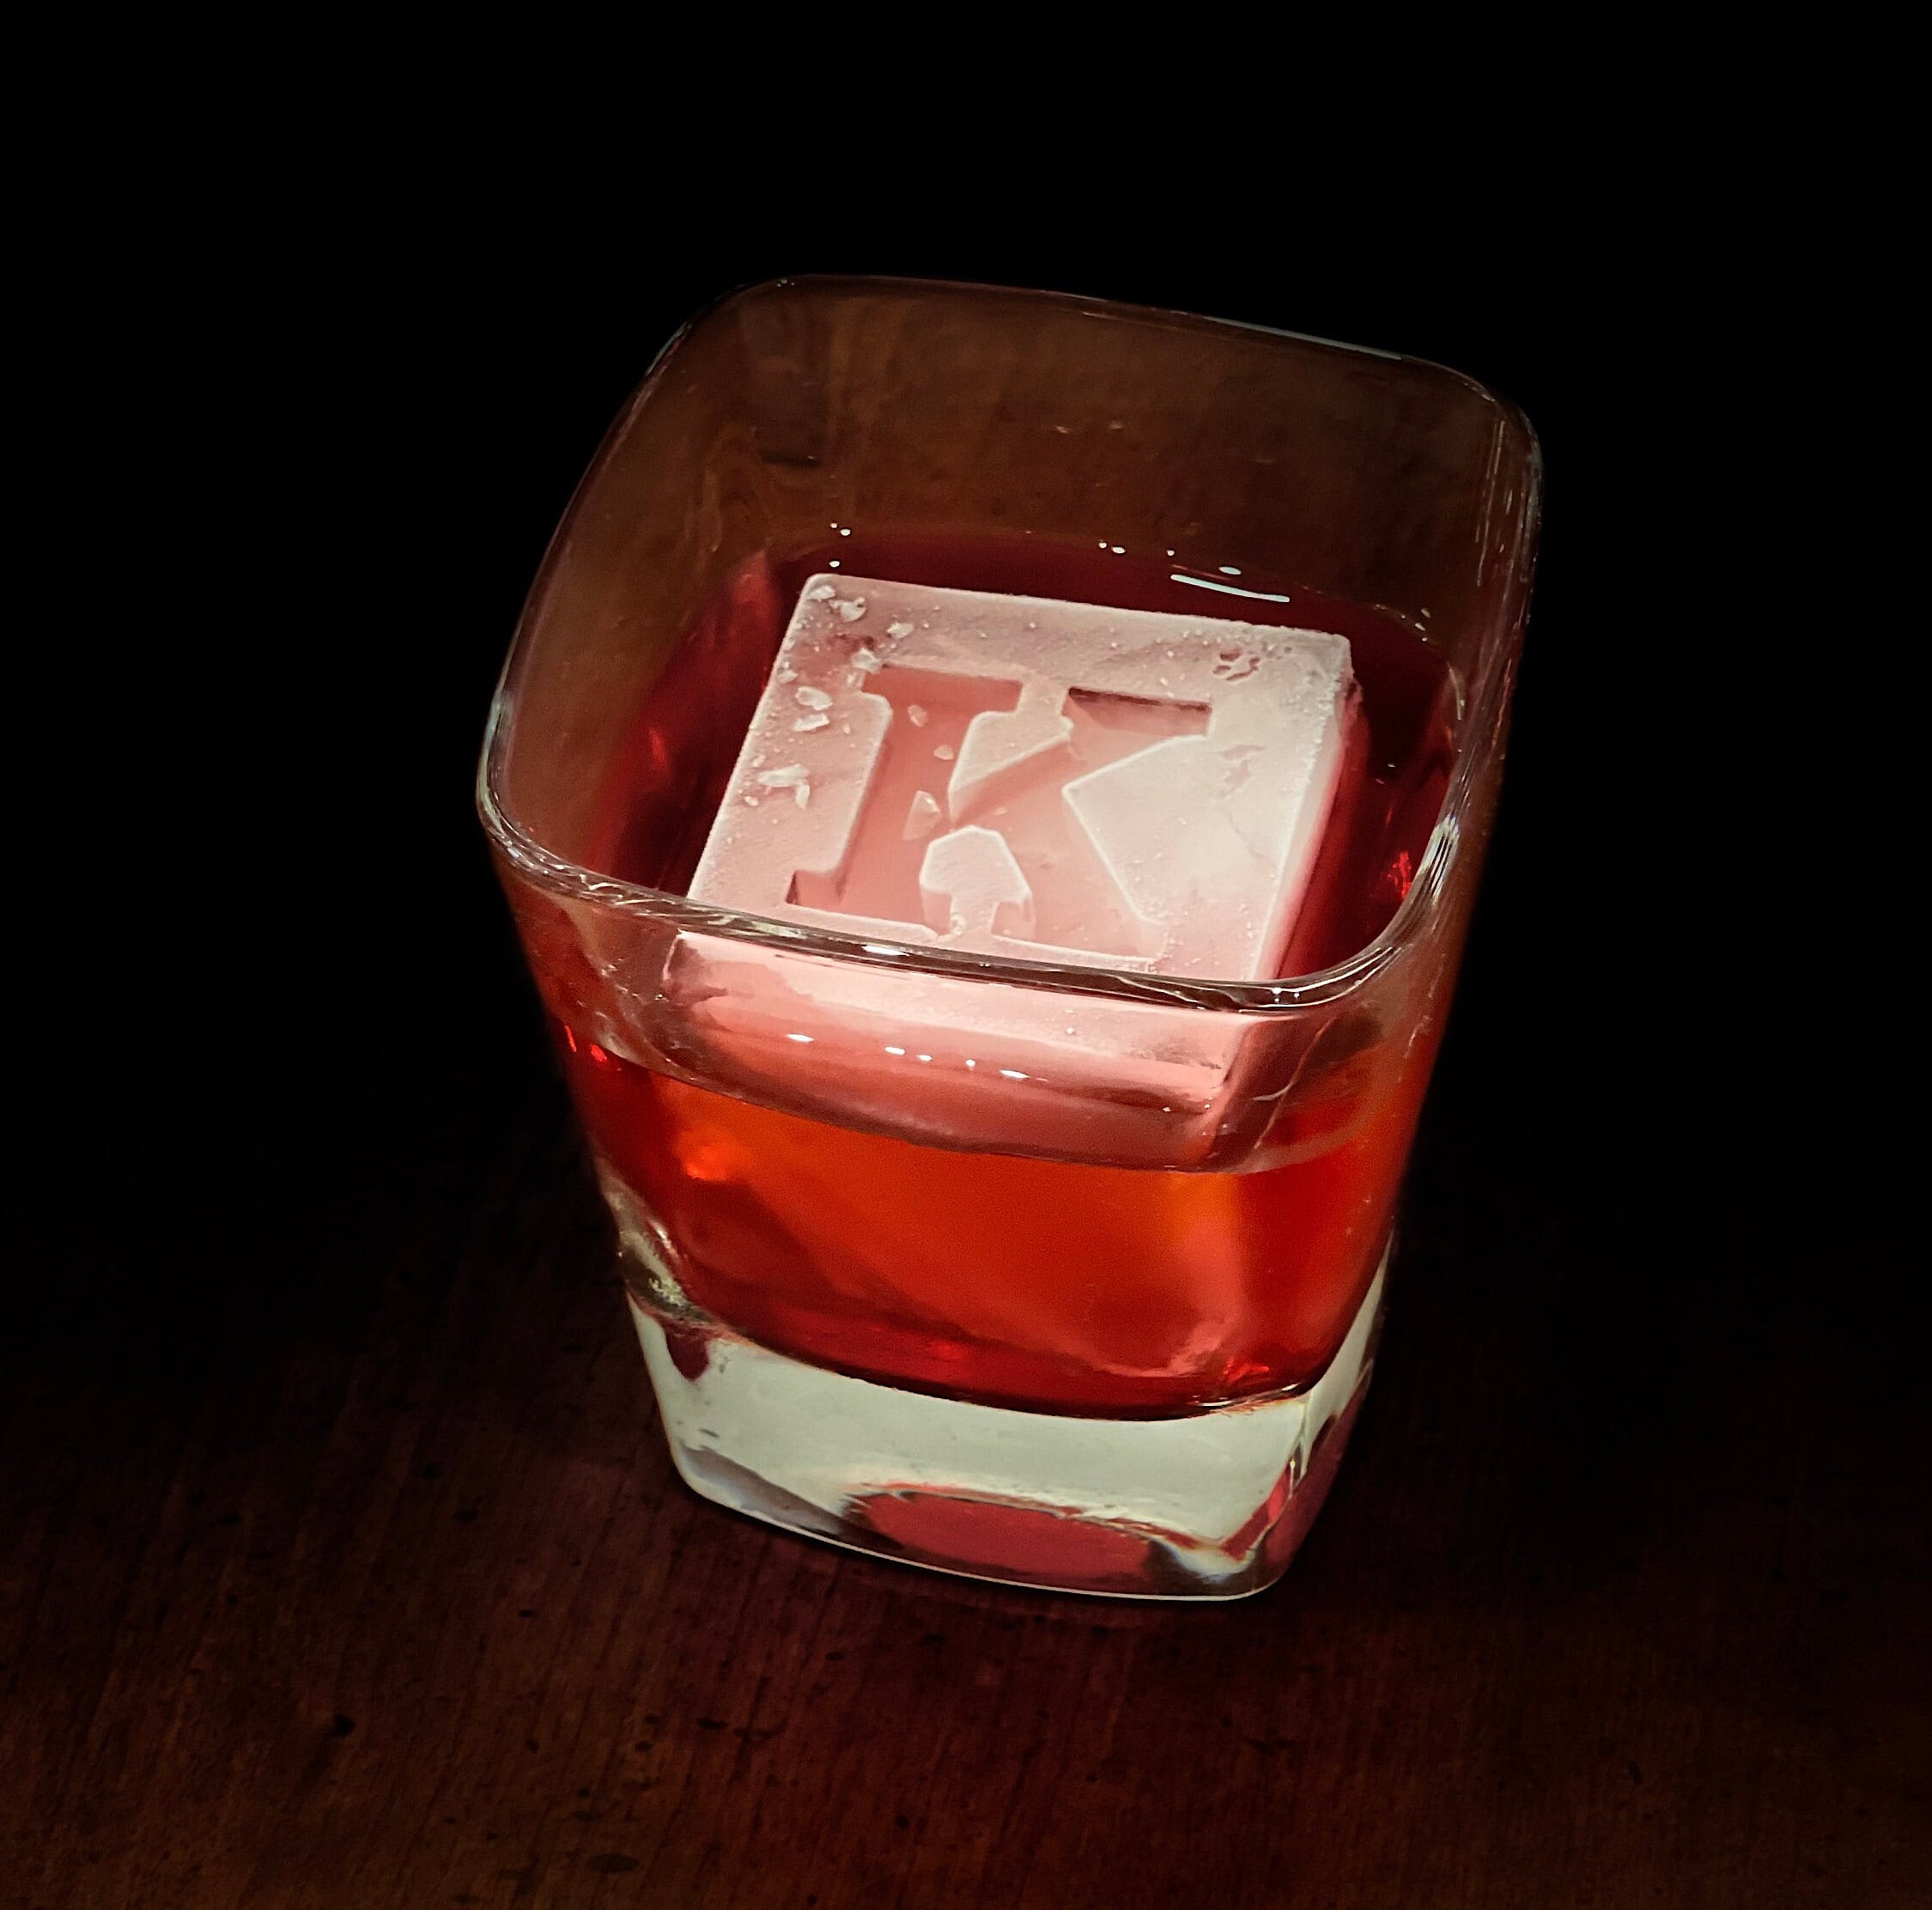 Tovolo Baseball Ice Molds (Set of 2) - Slow-Melting, Leak-Free, Reusable, &  BPA-Free Craft Ice Molds for Game Day/Great for Whiskey, Cocktails